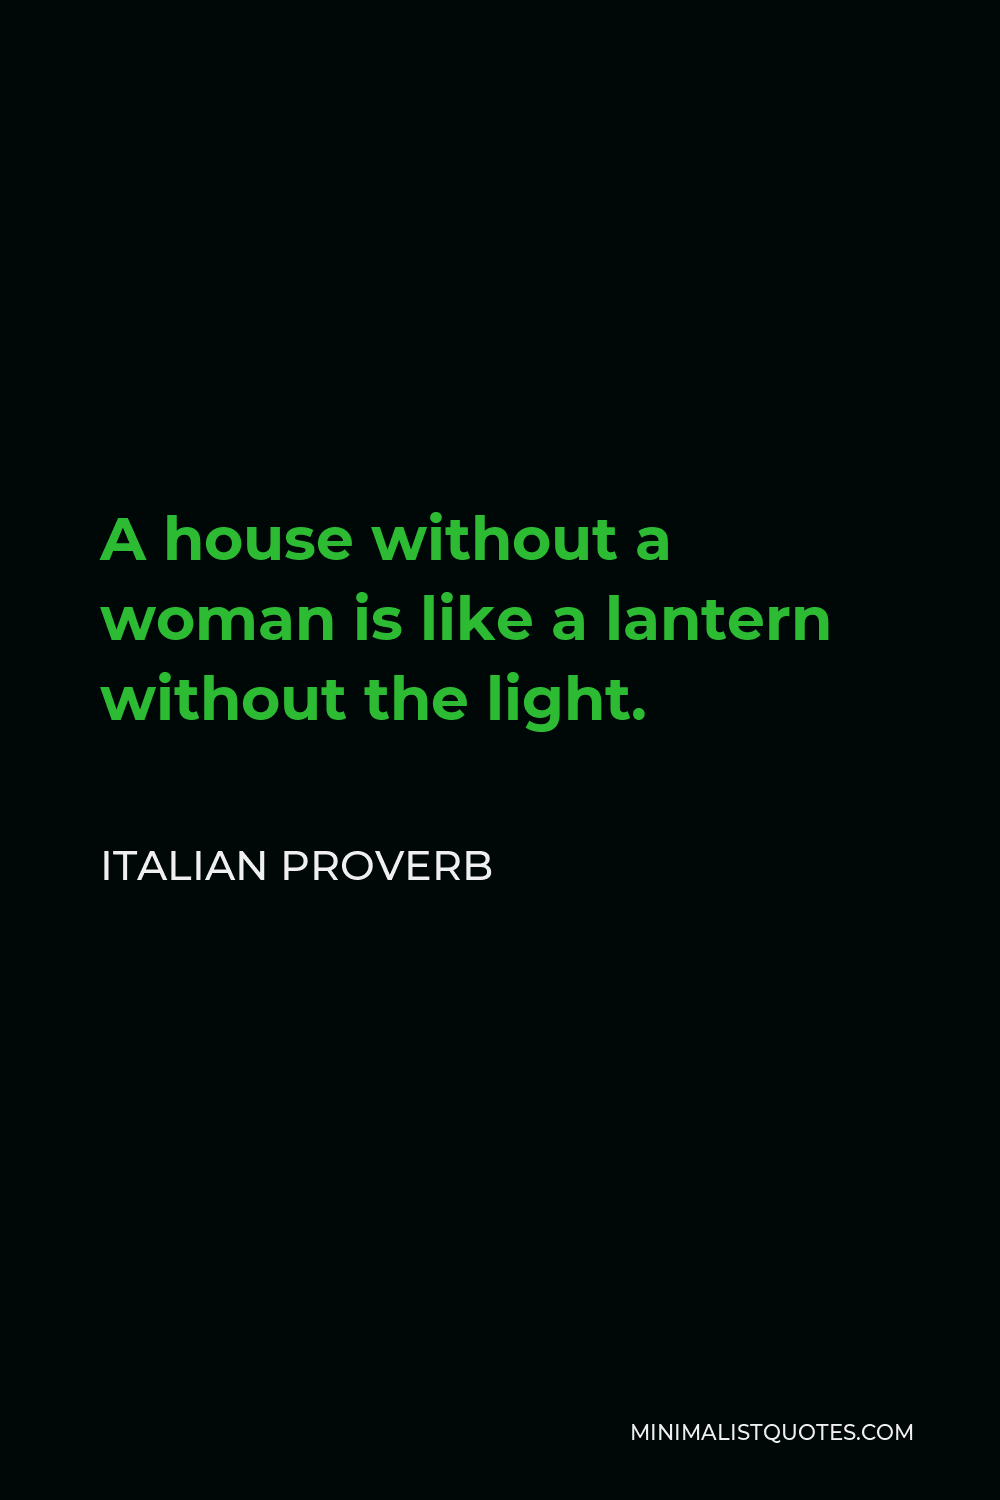 Italian Proverb Quote - A house without a woman is like a lantern without the light.